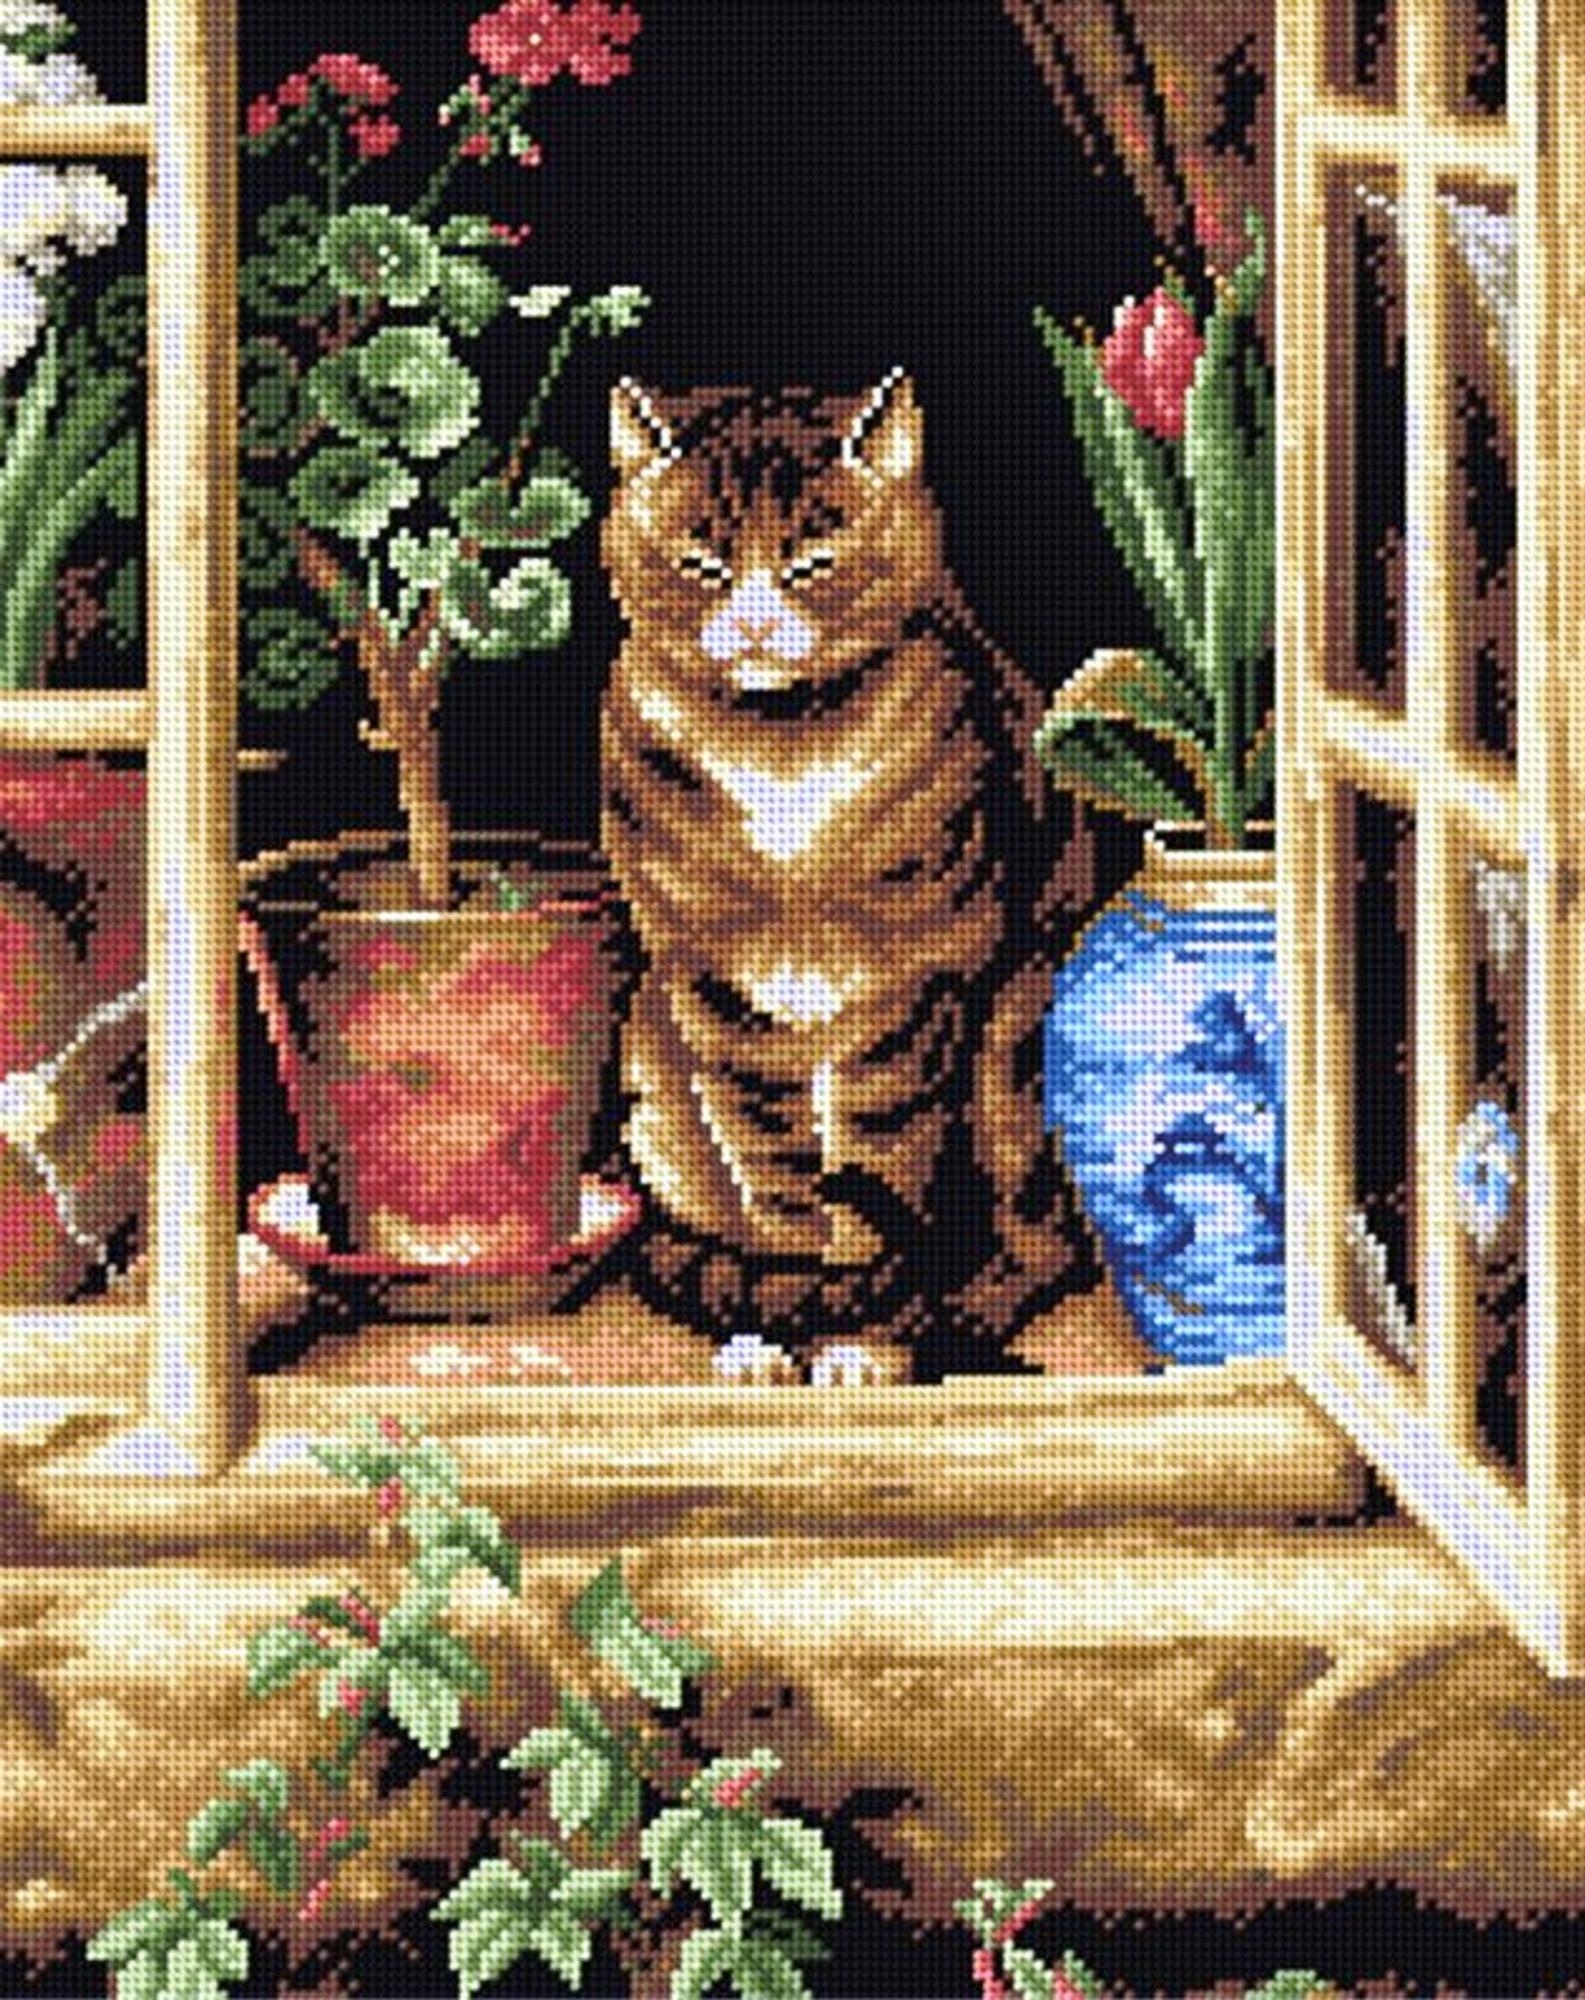 Cat in Cottage Window Printed Canvas for Cross Stitch Tapestry Gobelin  Embroidery Orchidea 2264M